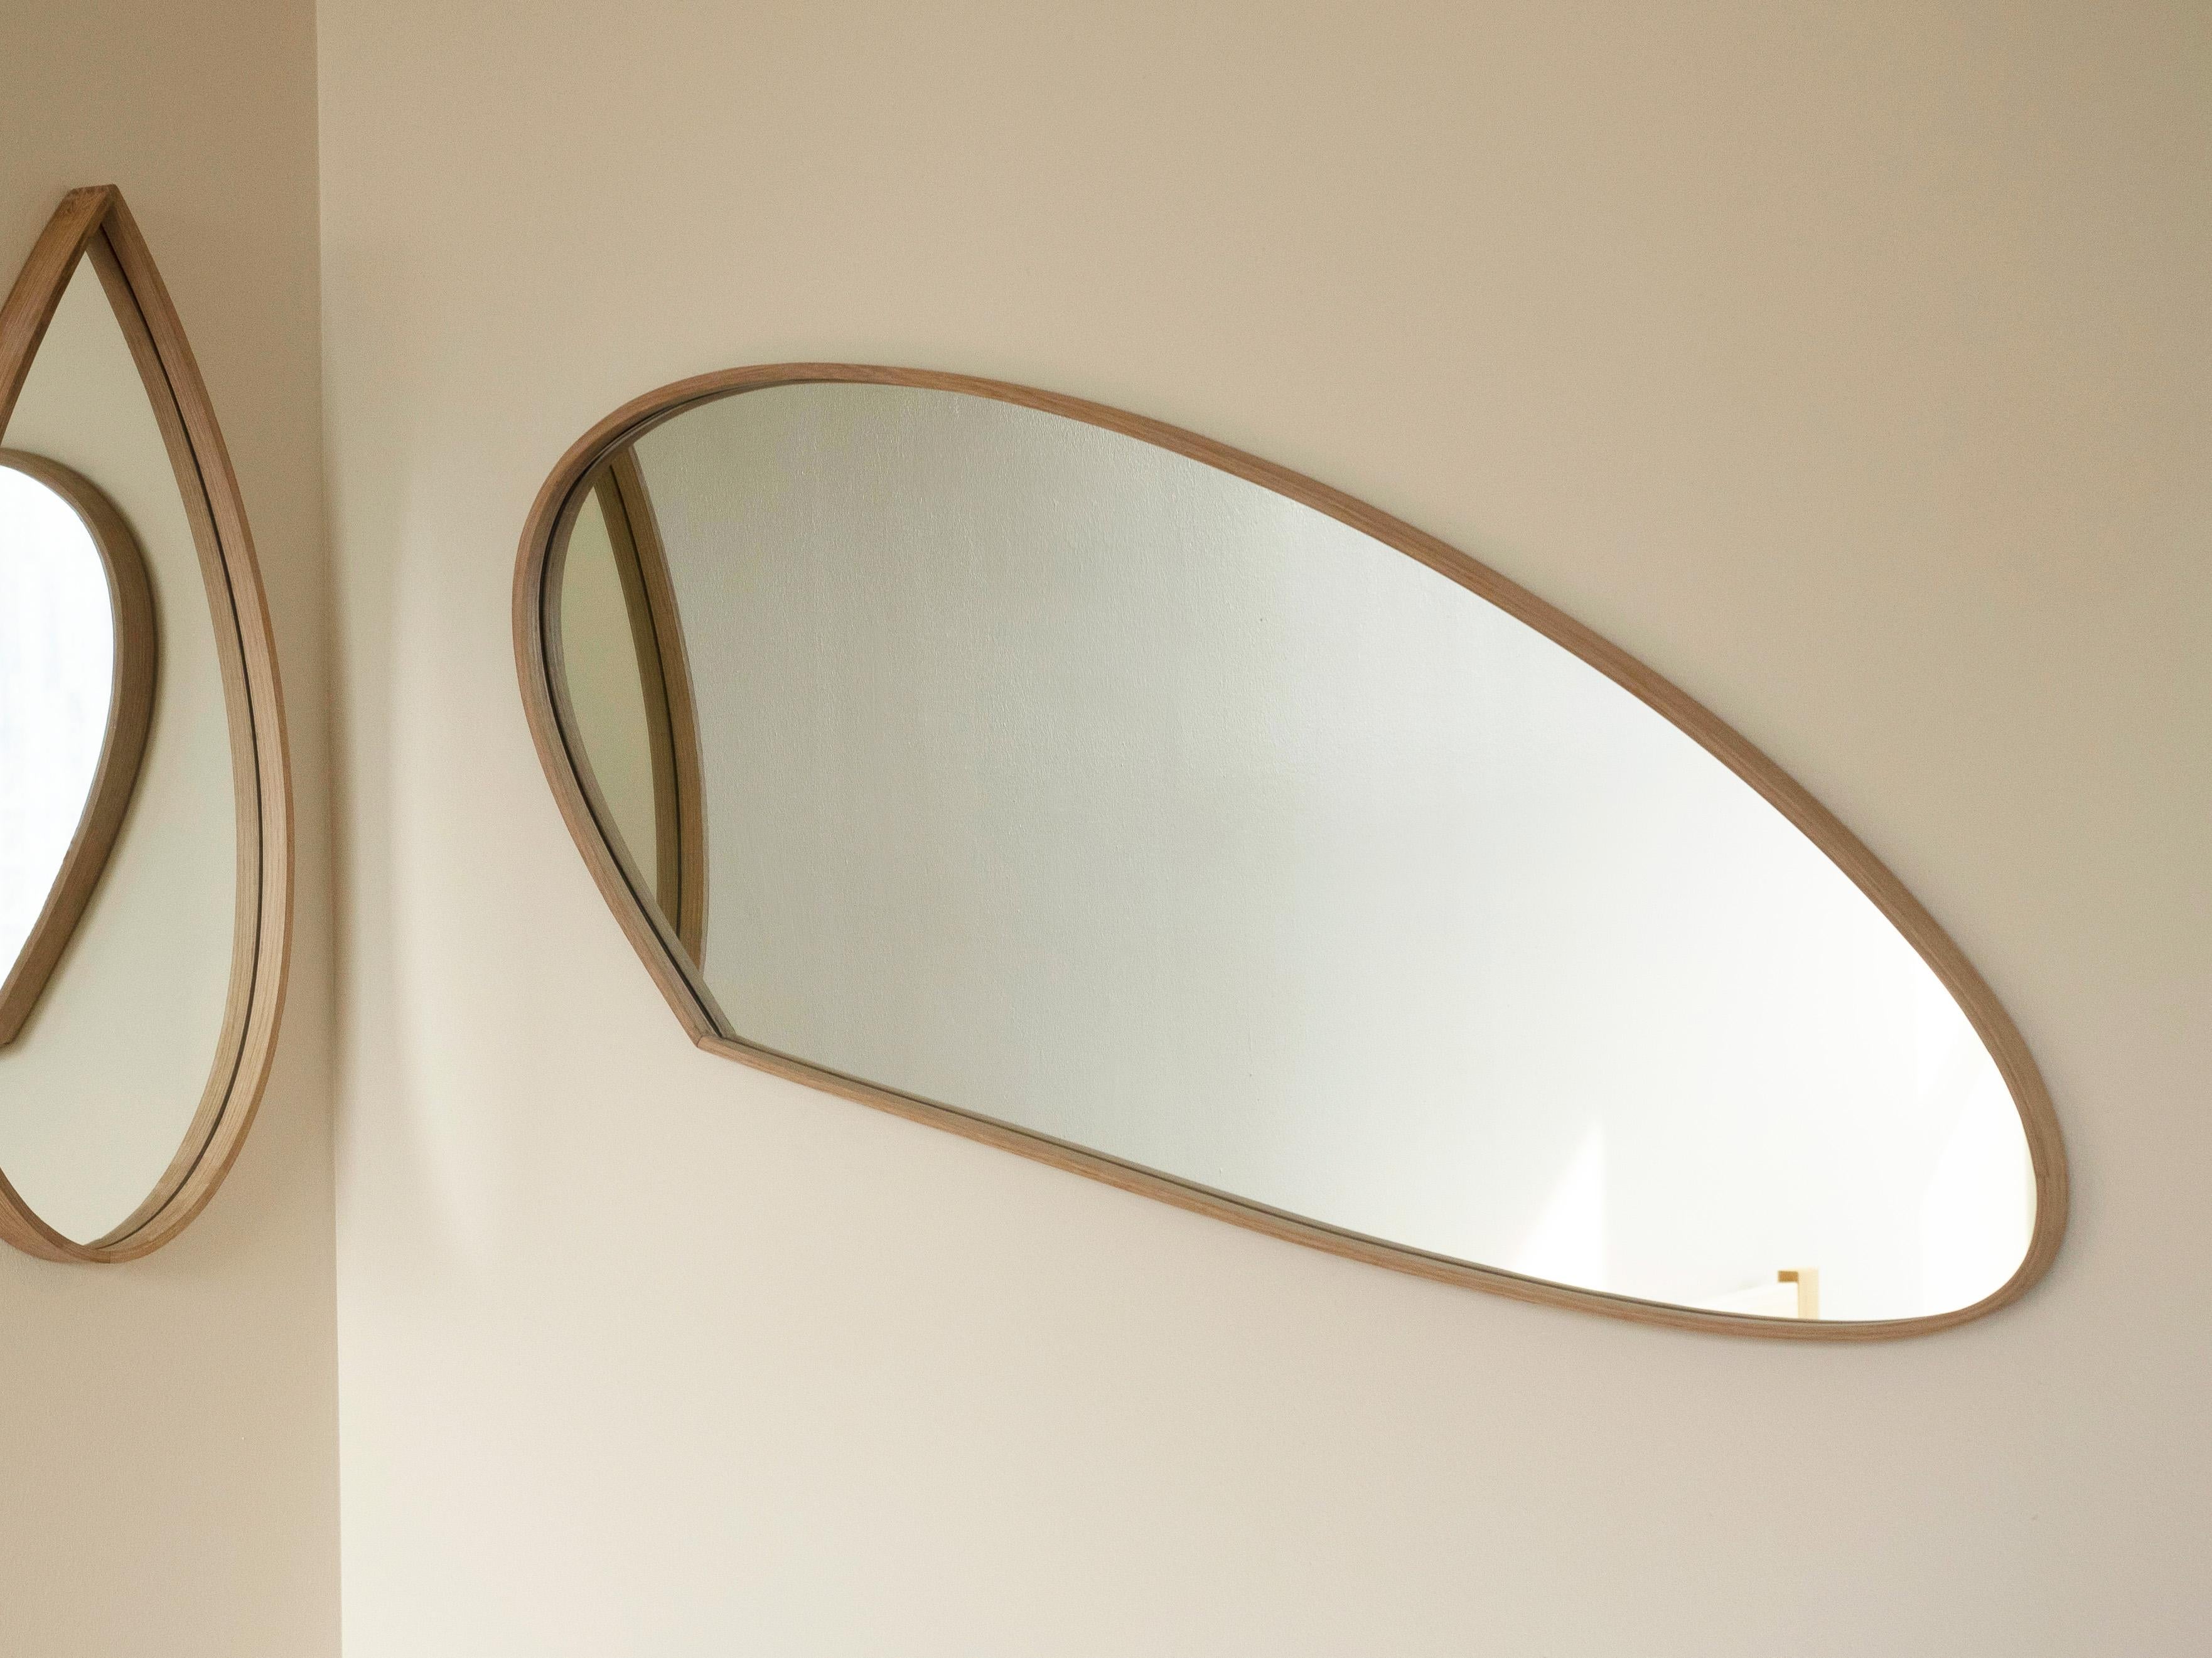 This wall mirror by Soo Joo uses wooden steam-bending techniques to create an Organic Mirror design. They have a timeless beauty that is not affected by changing trends and can be enjoyed for decades. The sculptural mirror fits into any interior